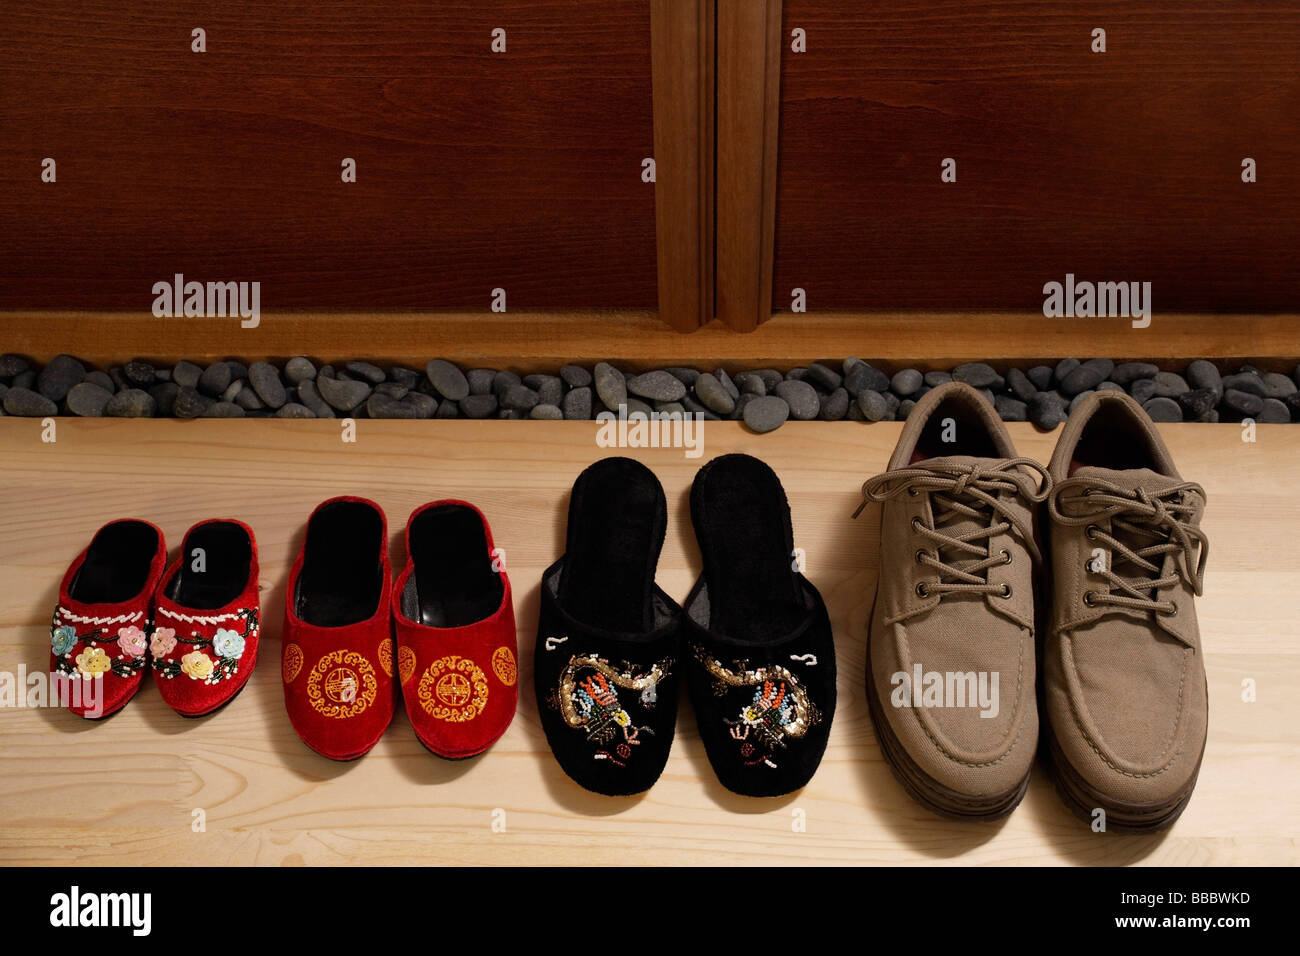 top view of slippers and shoes placed in a row at door front Stock Photo